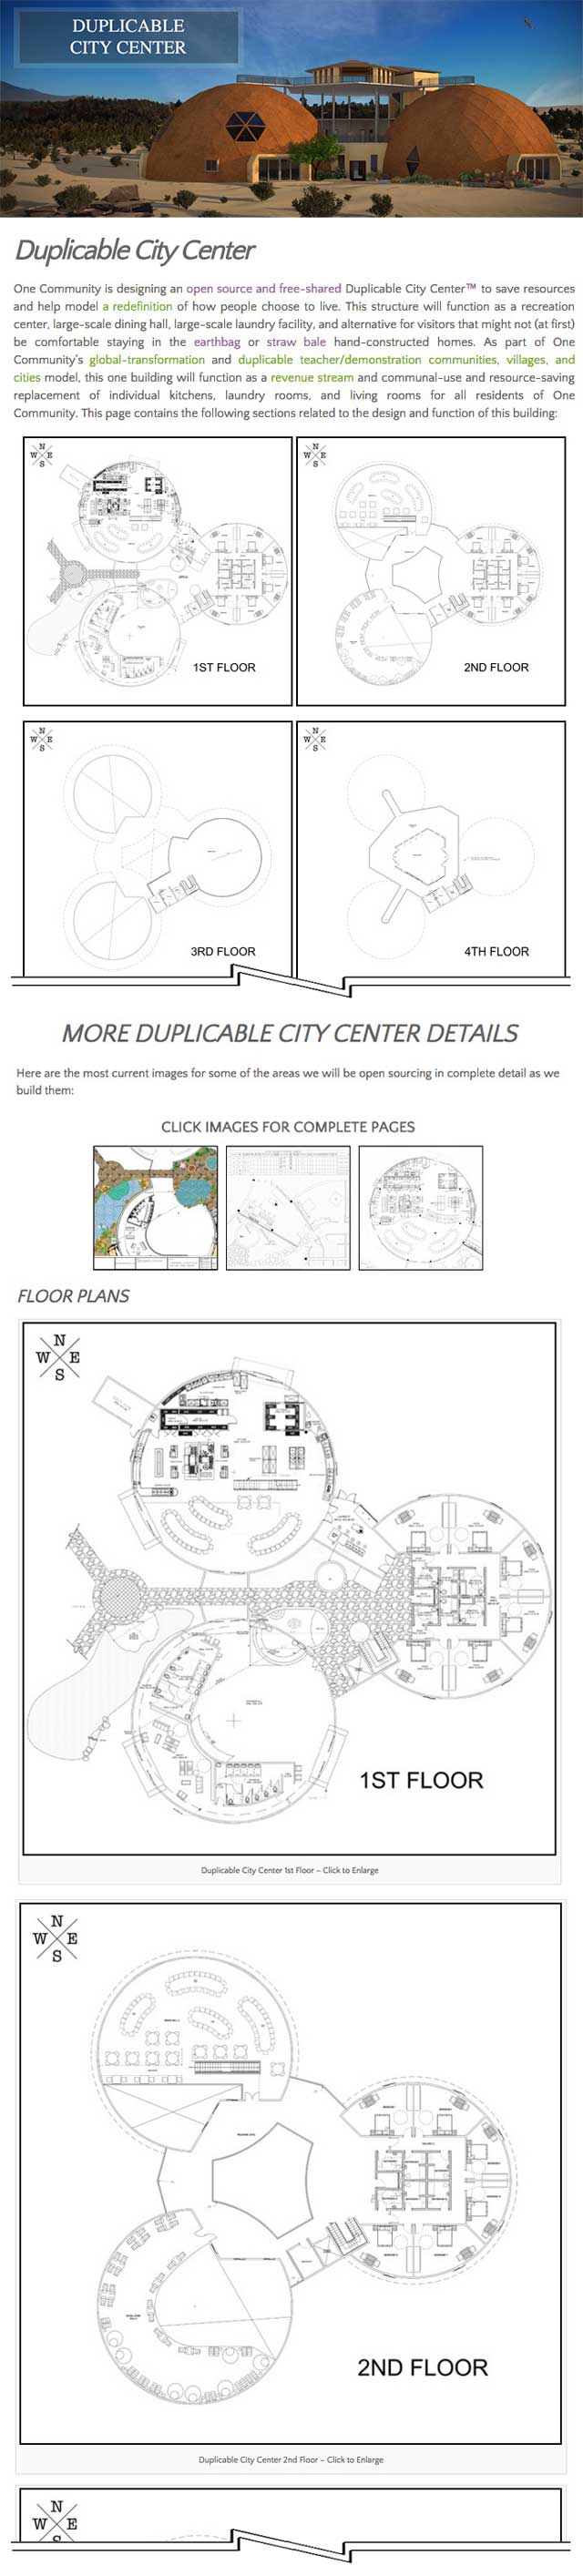 The core team also completed a huge update of the Duplicable City Center open source portal, improving the formatting and adding updated floor plan exports from AutoCAD. You can see all this great work here, and visit the updated page for clickable and enlargeable images.